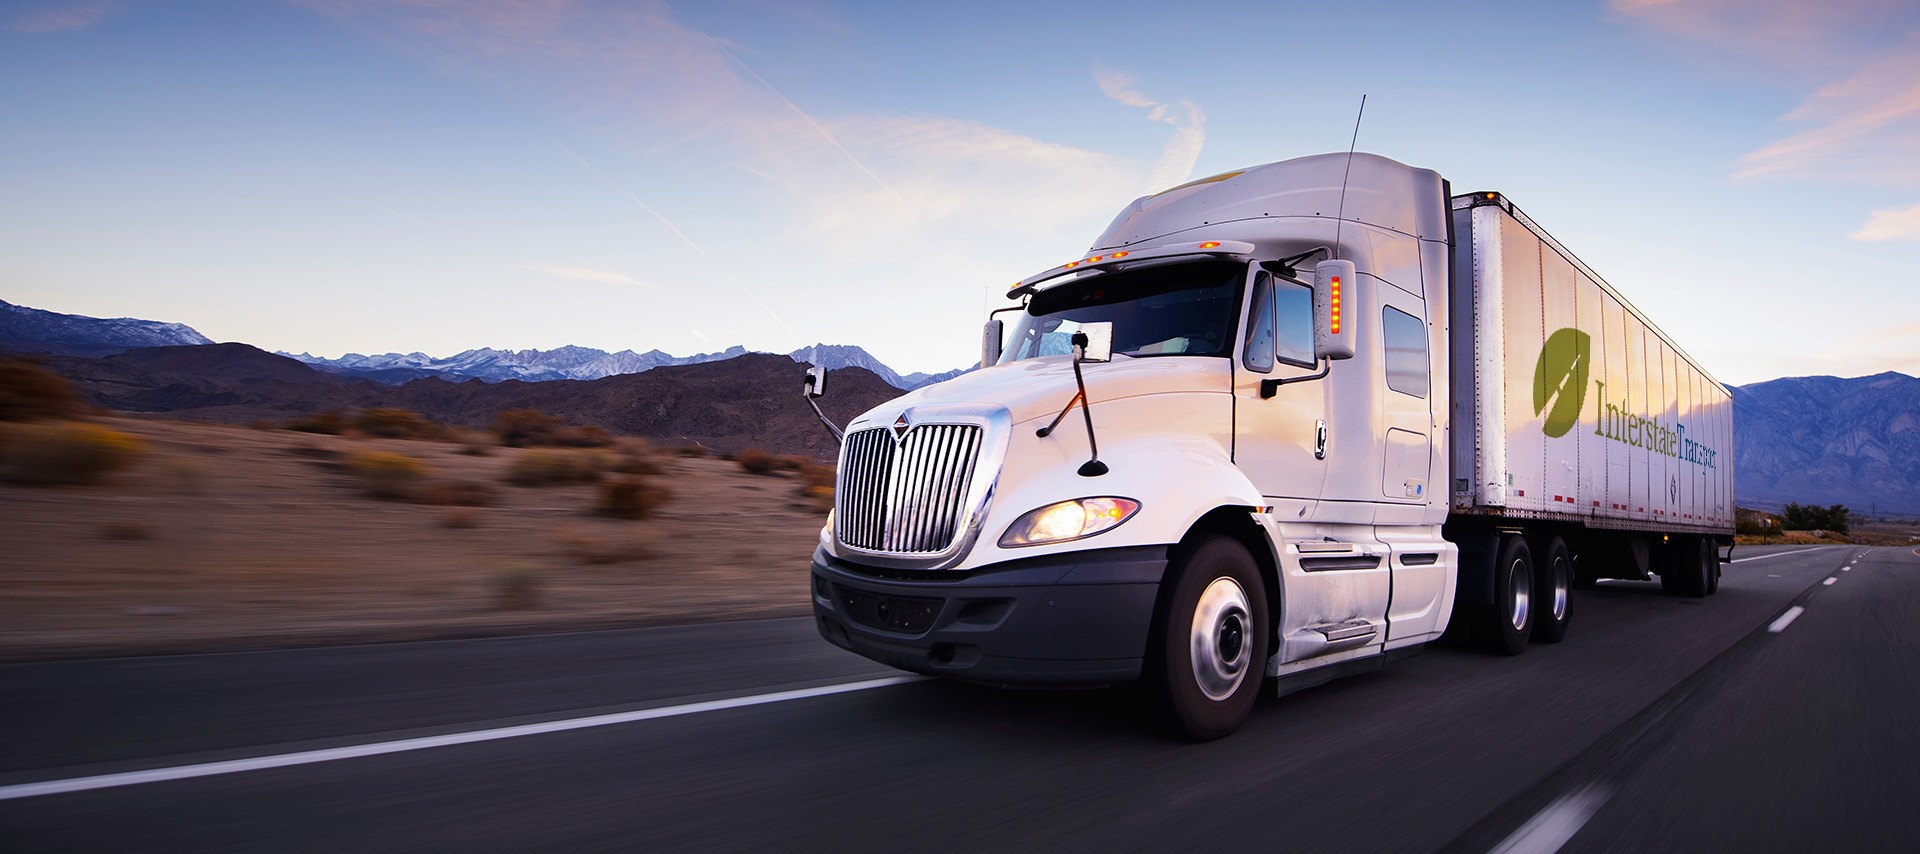 How to Select a High Quality Freight Broker